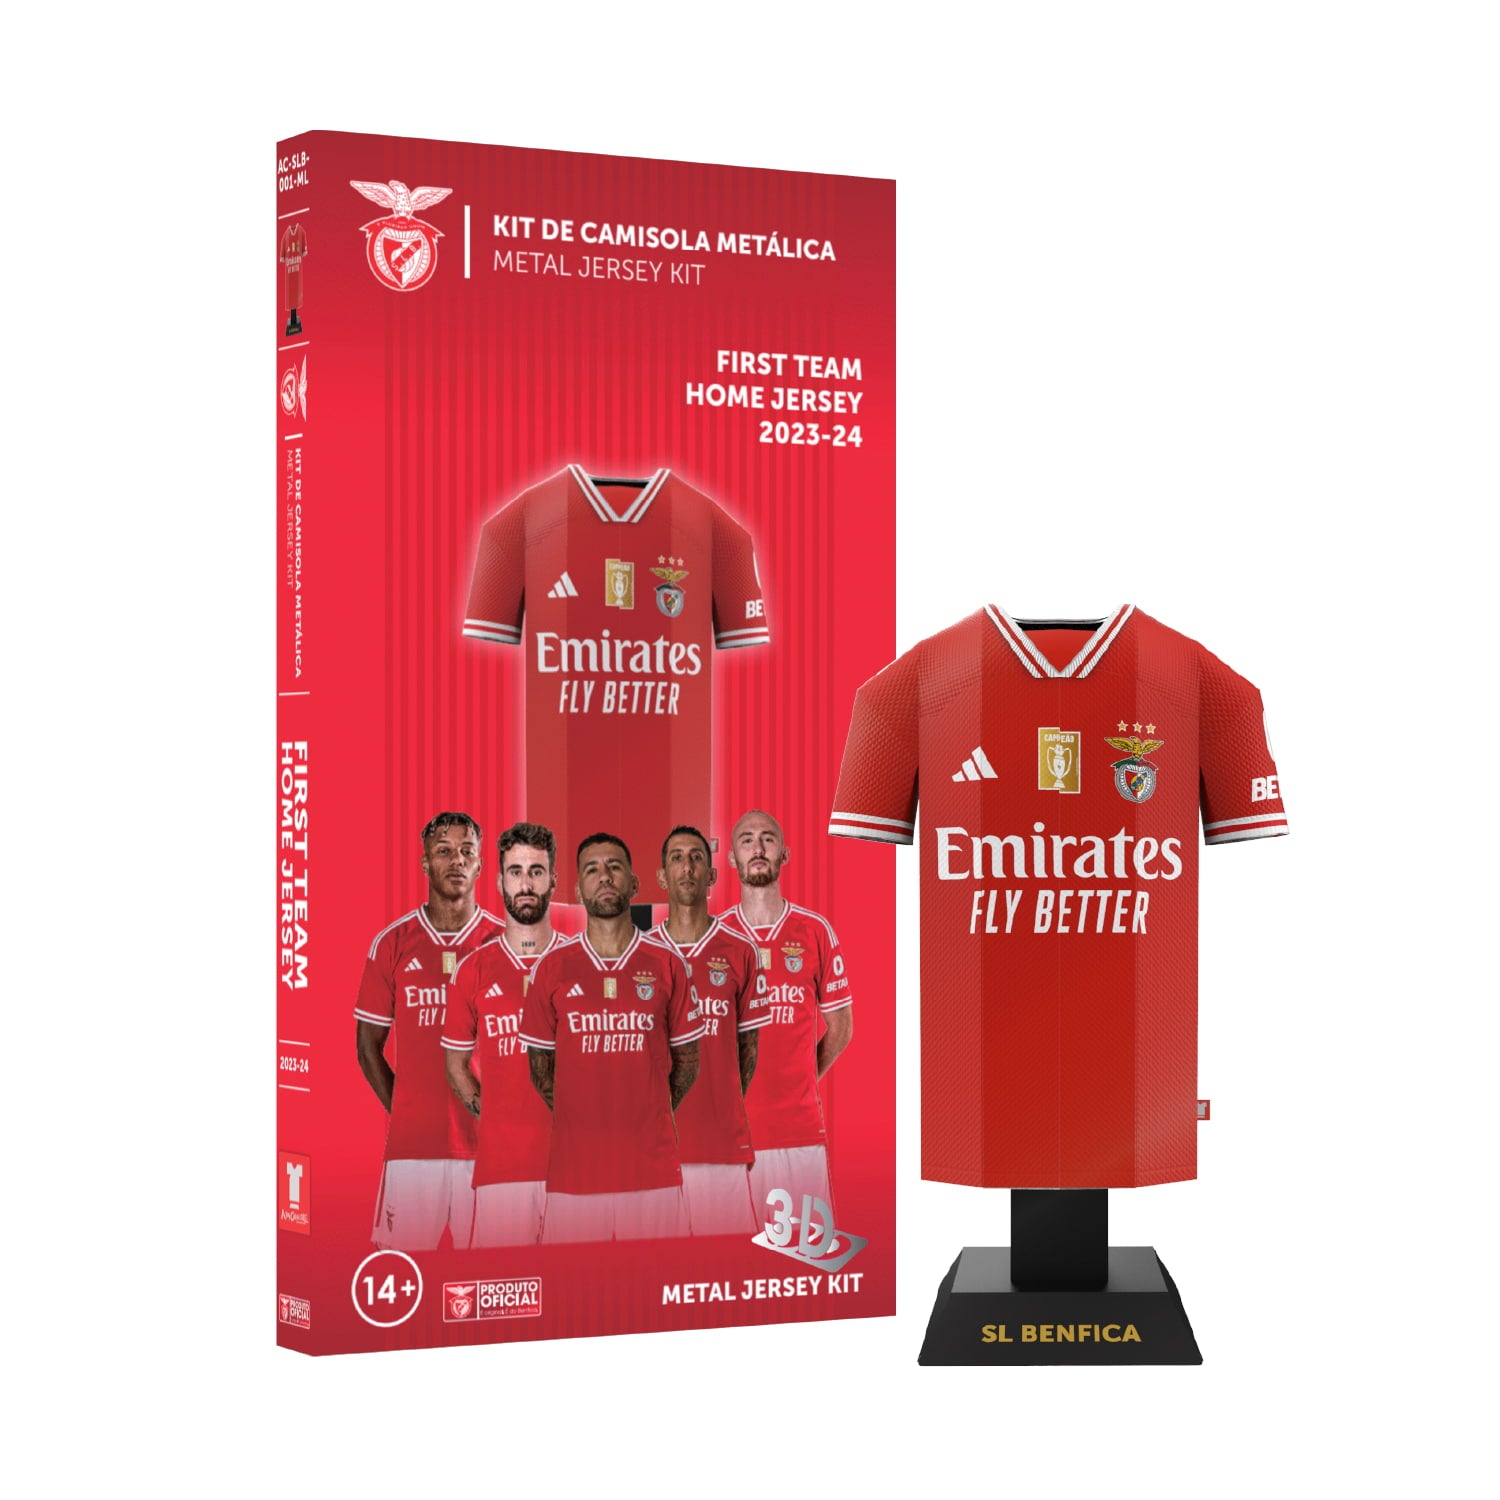 Benfica kit with exclusive packaging